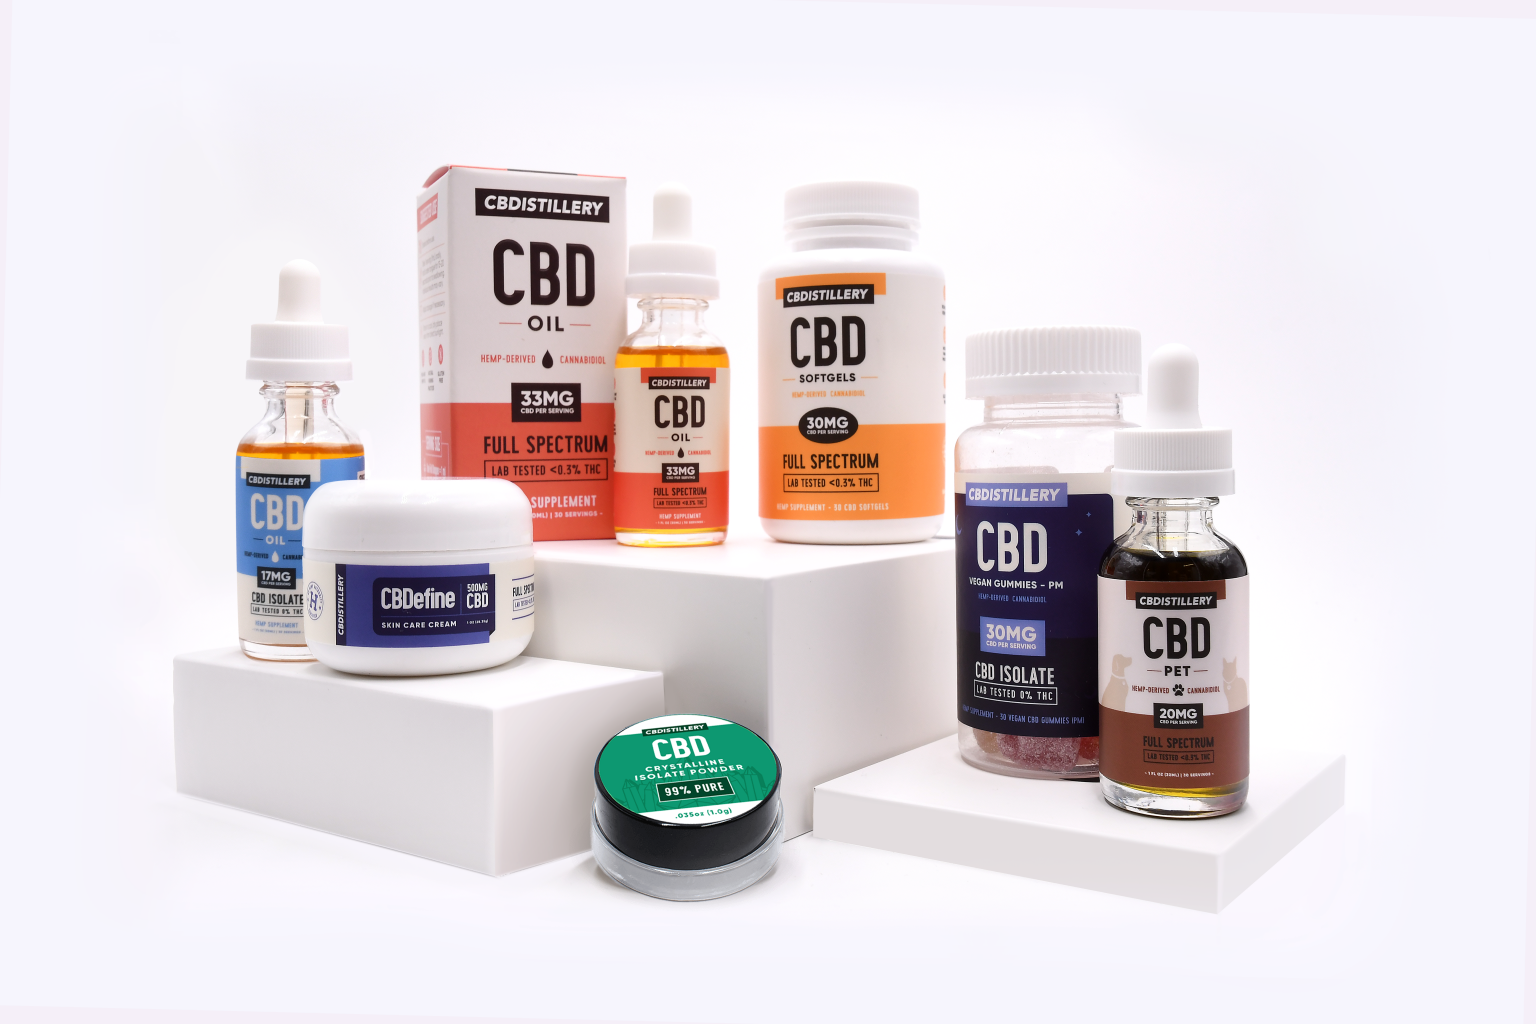 Top 10 Favourite CBD Products For 2019 – Complete List